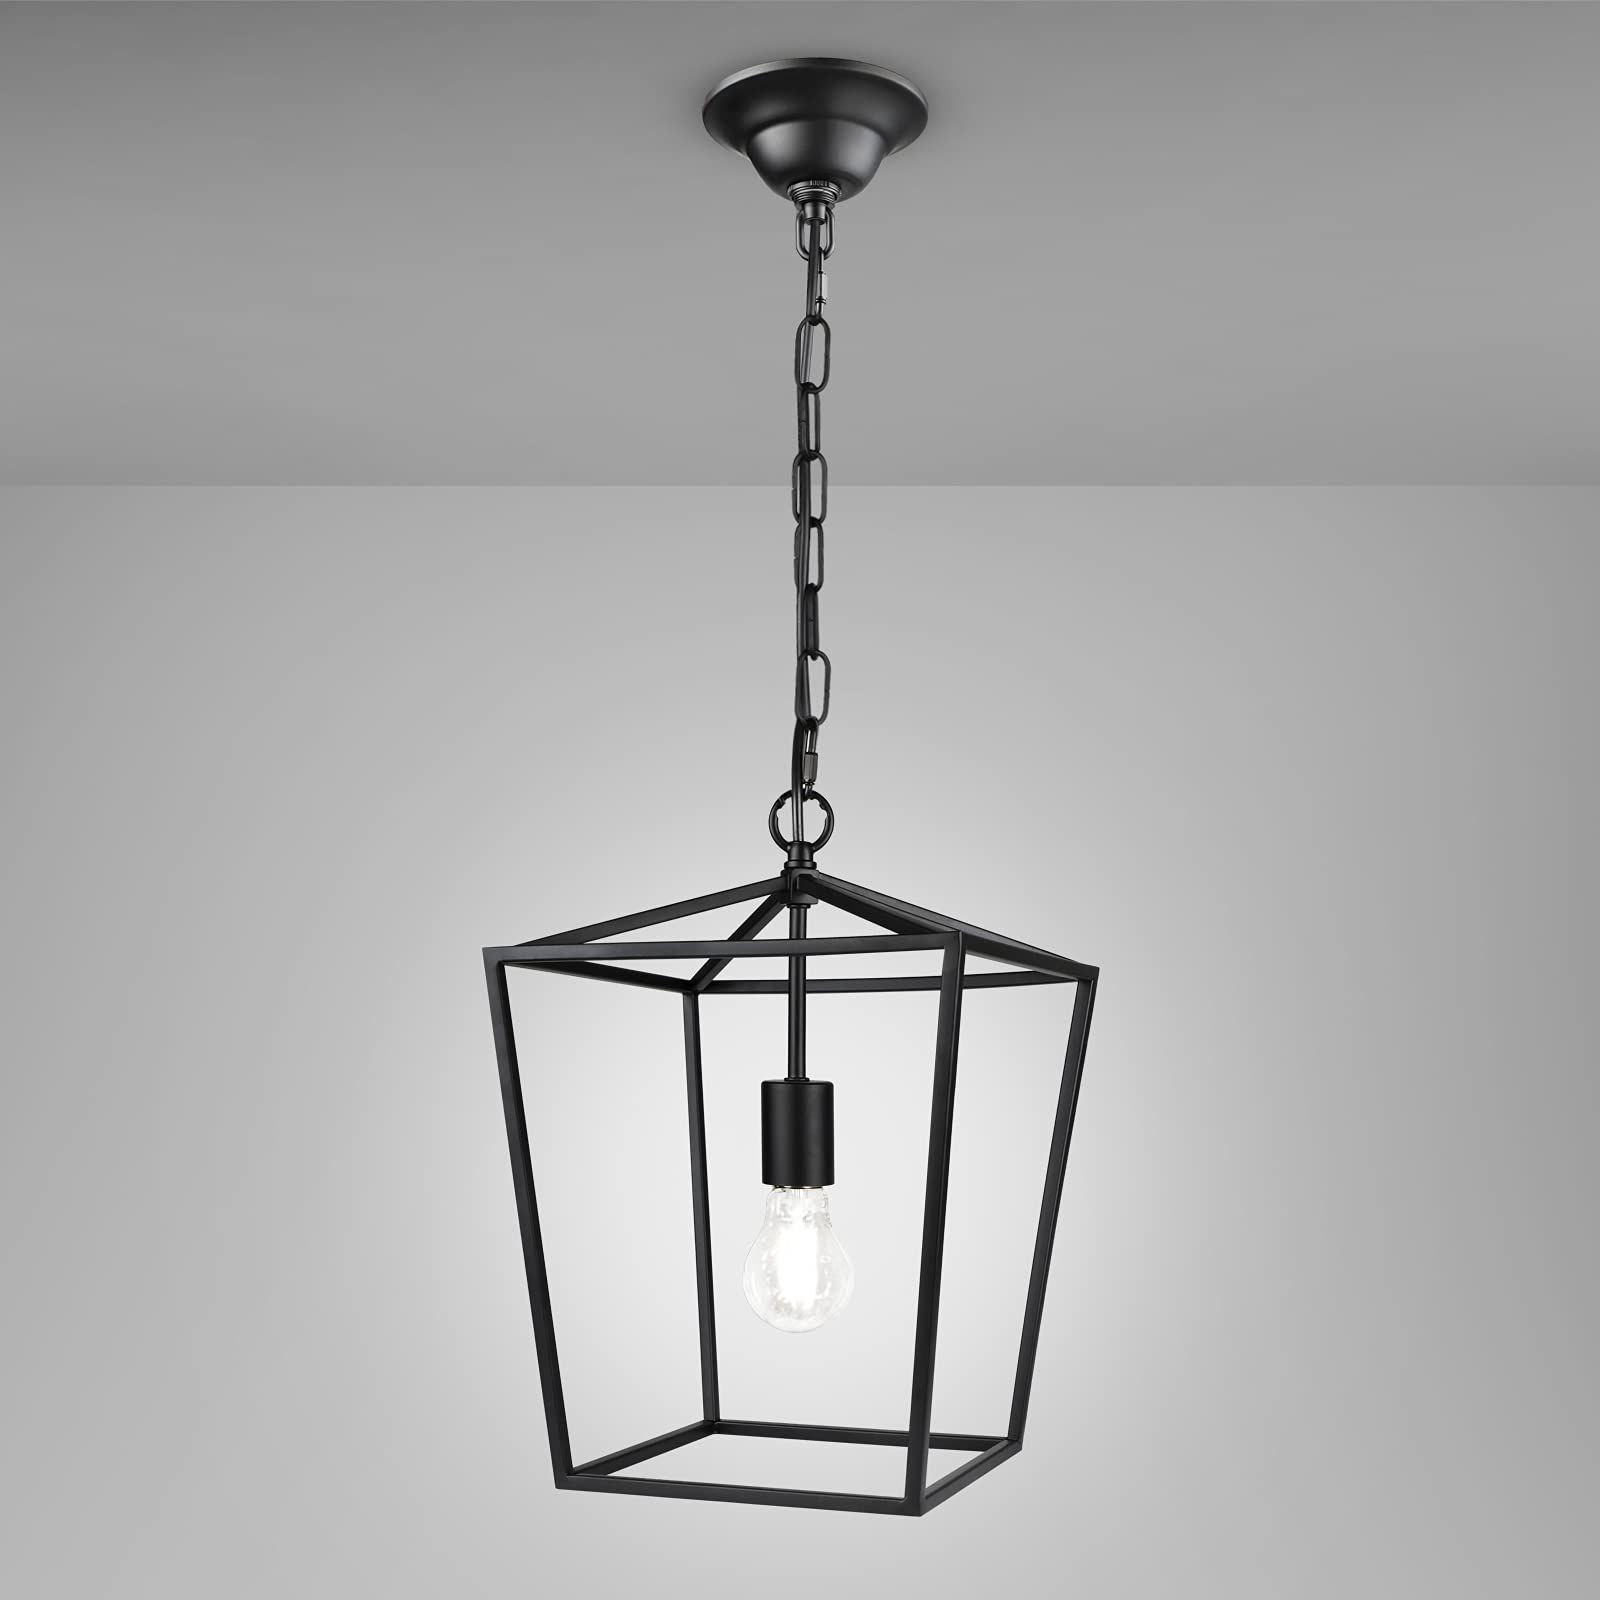 Newest Matte Black Lantern Chandeliers With Amazon: Ascher Lantern Pendant Light, Hanging Lantern Chandelier For  Dining Room Kitchen, Industrial Vintage Iron Cage, Matte Black Finish, E26  Base(bulb Not Included) : Everything Else (View 11 of 15)